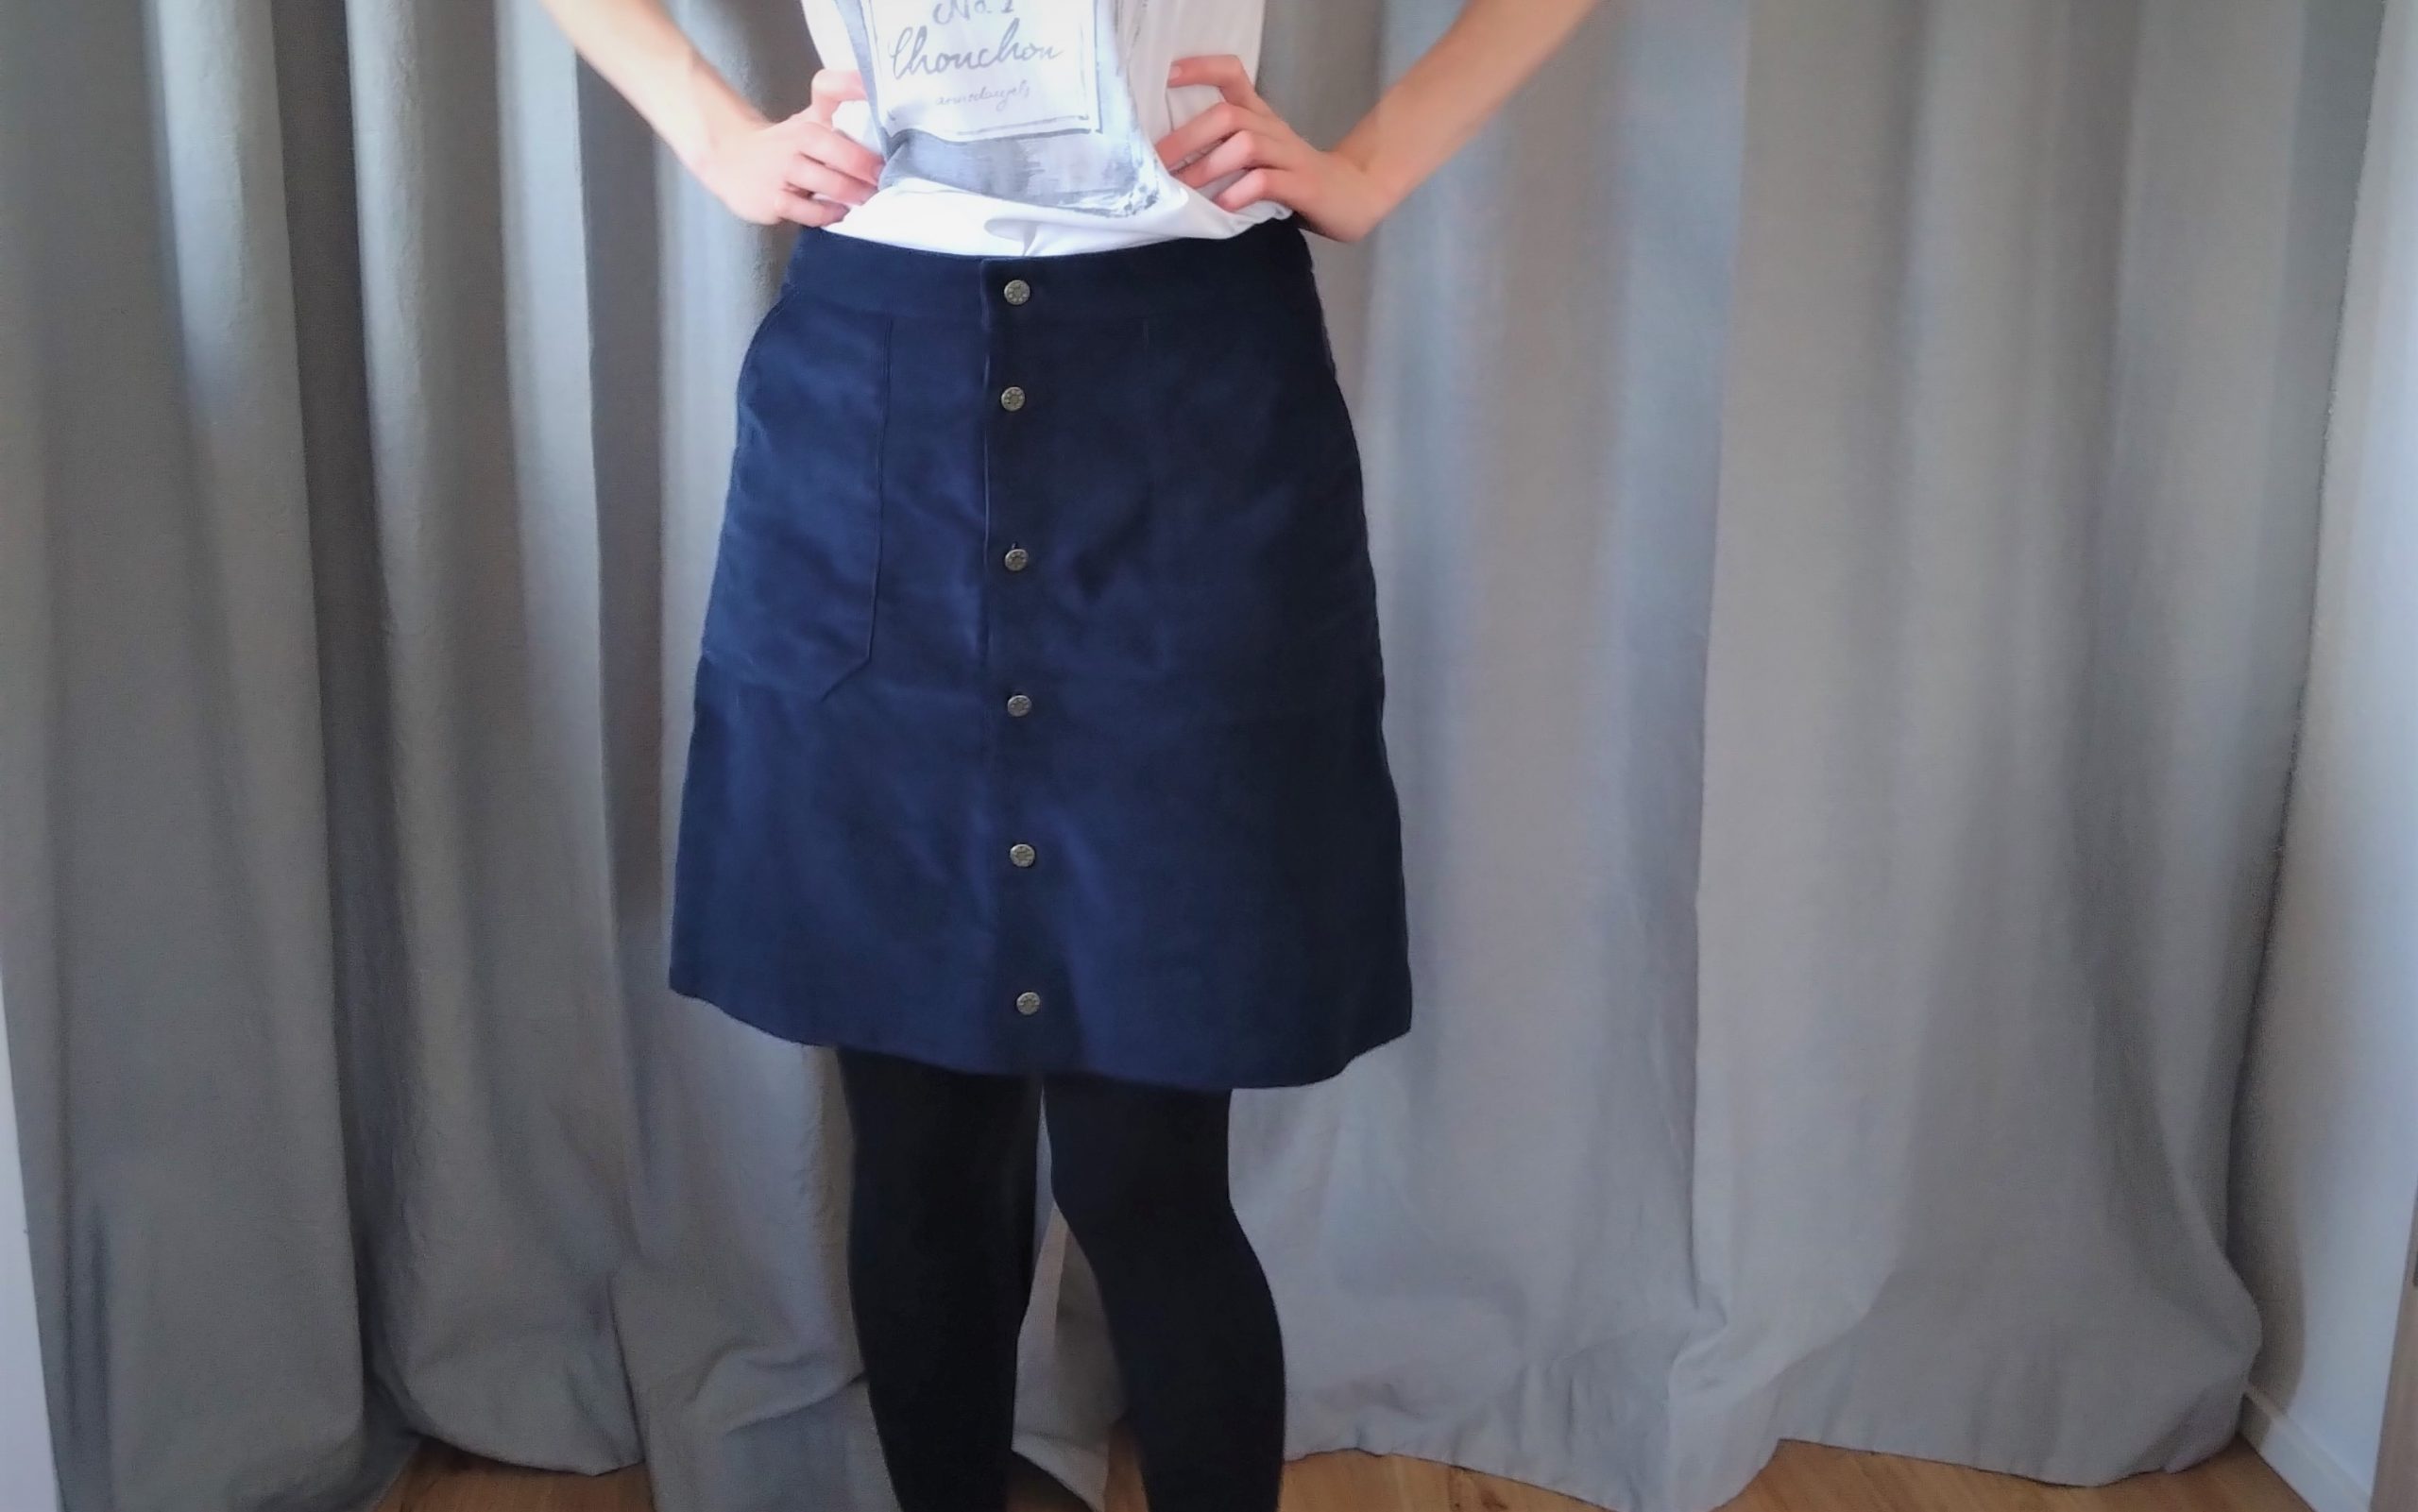 Tilly and the Buttons, Schnittmuster, Pattern, Bobbi, Rock, Skirt